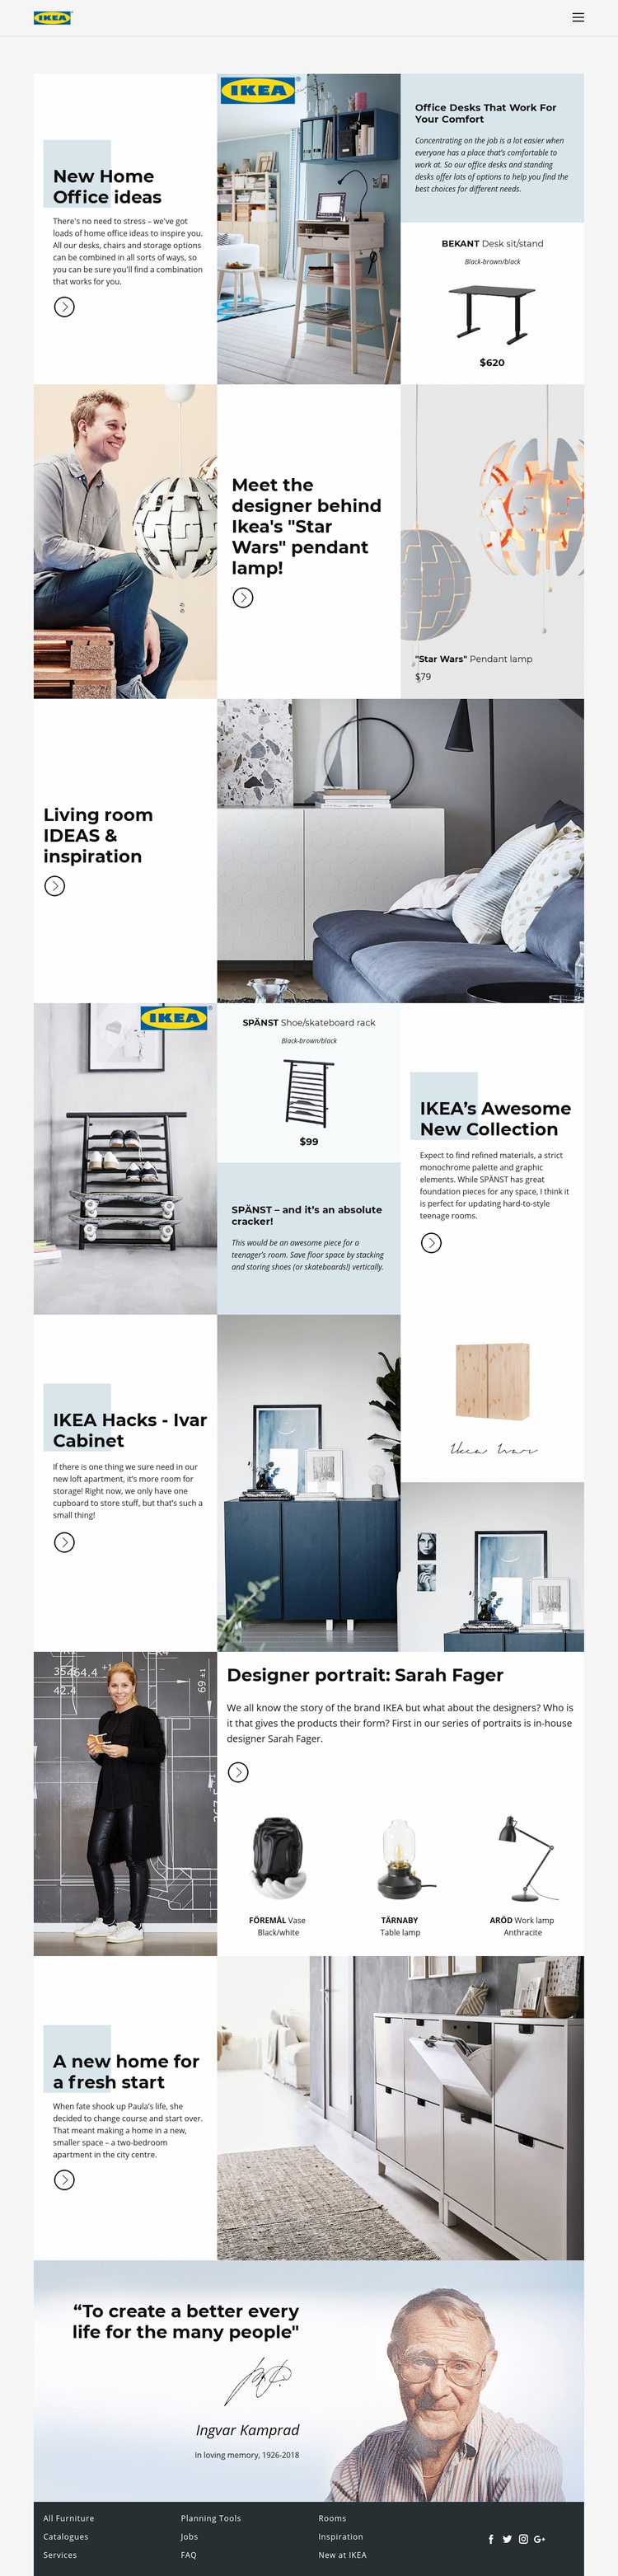 Inspiration from IKEA Squarespace Template Alternative